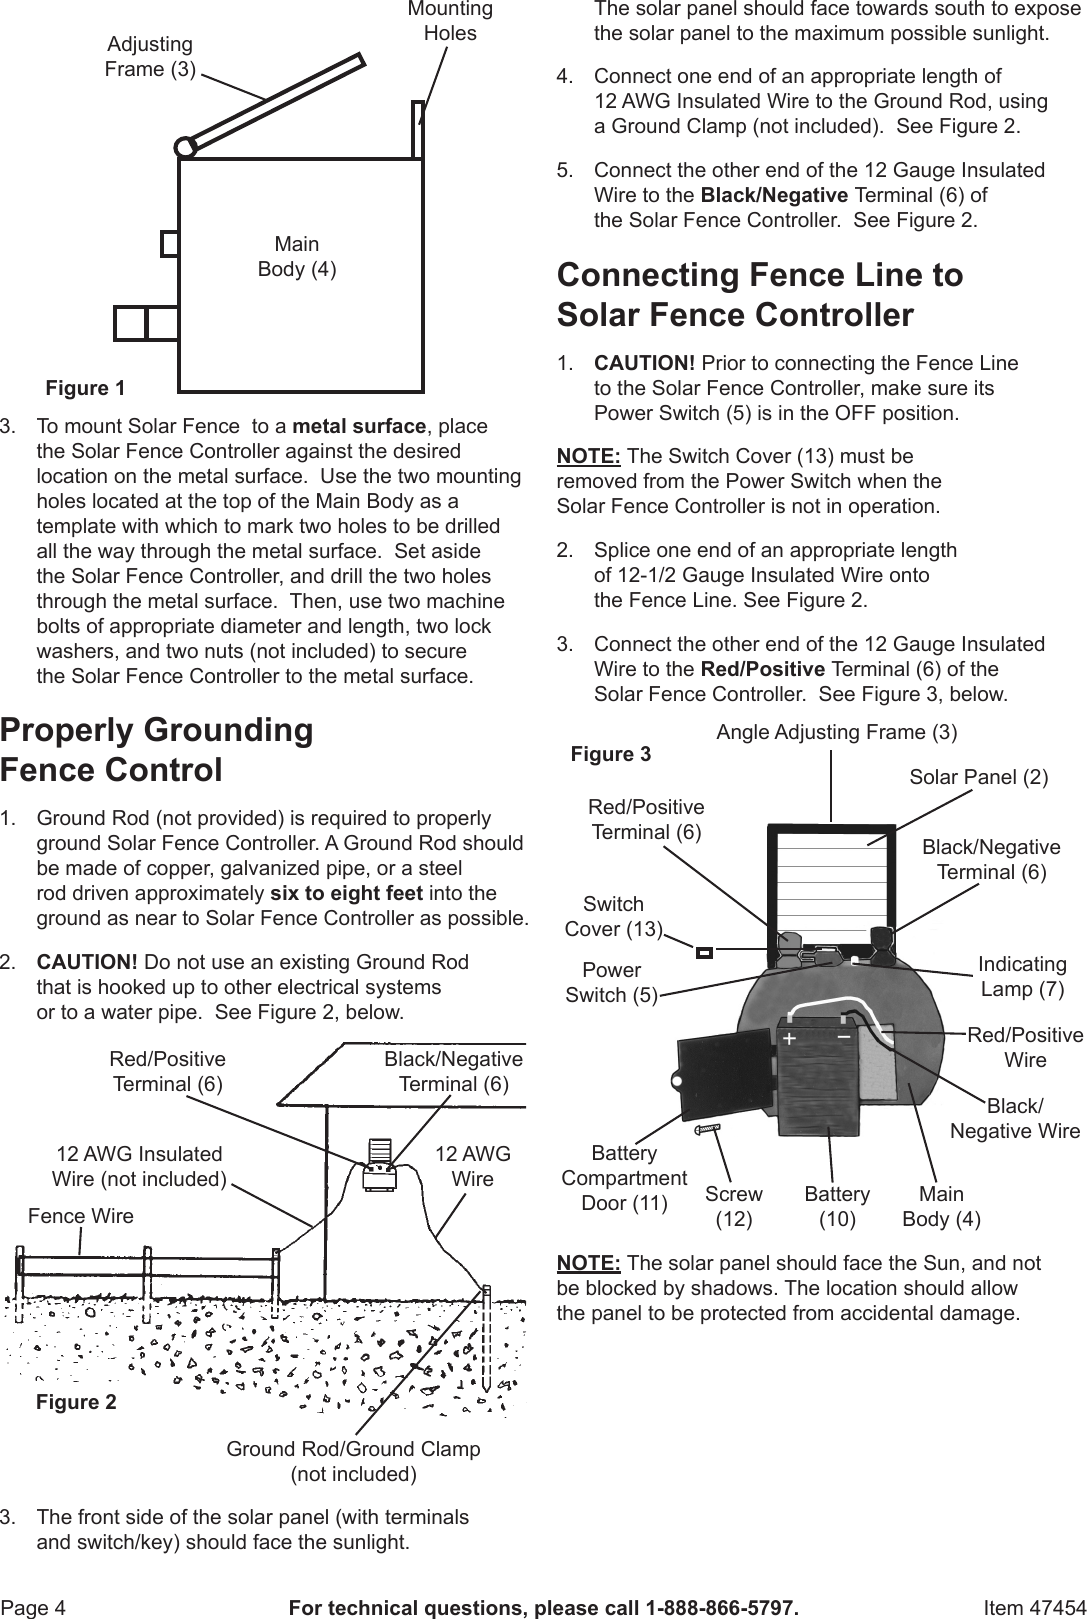 Page 4 of 8 - Harbor-Freight Harbor-Freight-Adjustable-Solar-Electric-Fence-Controller-Product-Manual-  Harbor-freight-adjustable-solar-electric-fence-controller-product-manual